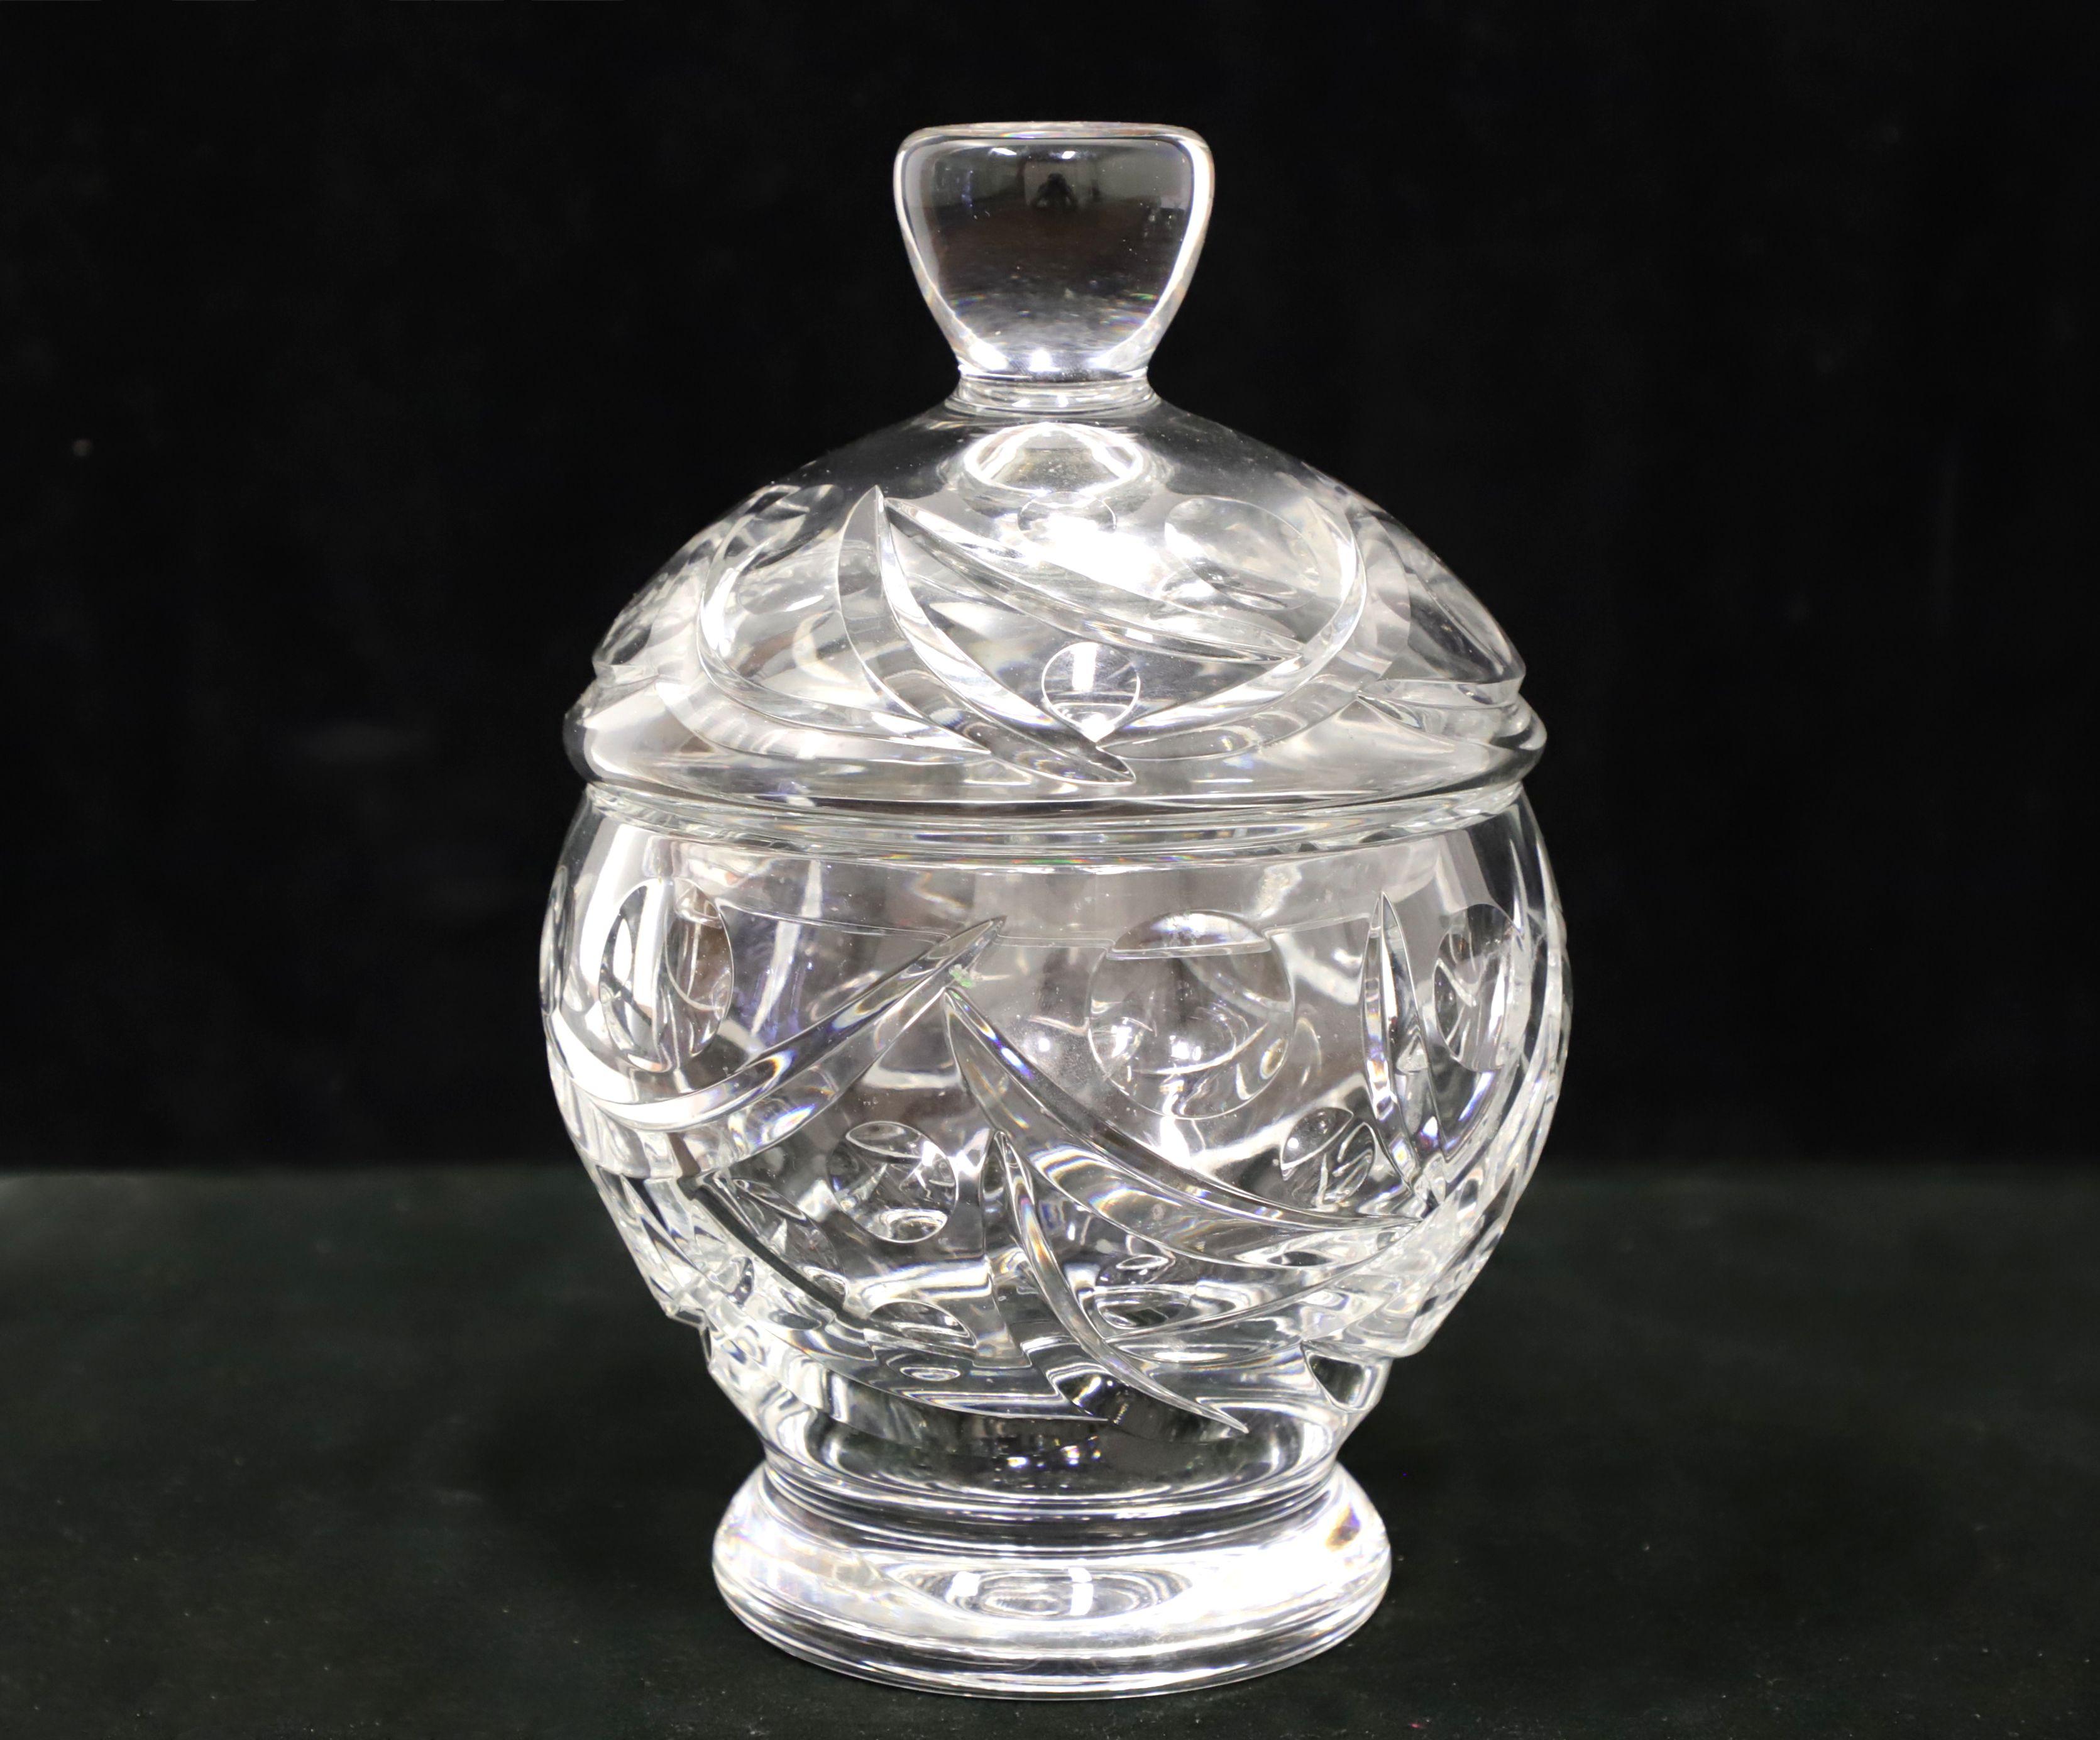 A Mid 20th Century crystal candy dish with lid. Clear crystal round bowl with a cut pattern. Matching clear crystal cut pattern round lid. Origin unknown, most likely the USA.

Measures: 6.25 W 6.25 D 9 H, Weighs Approximately: 6 lbs

Exceptionally